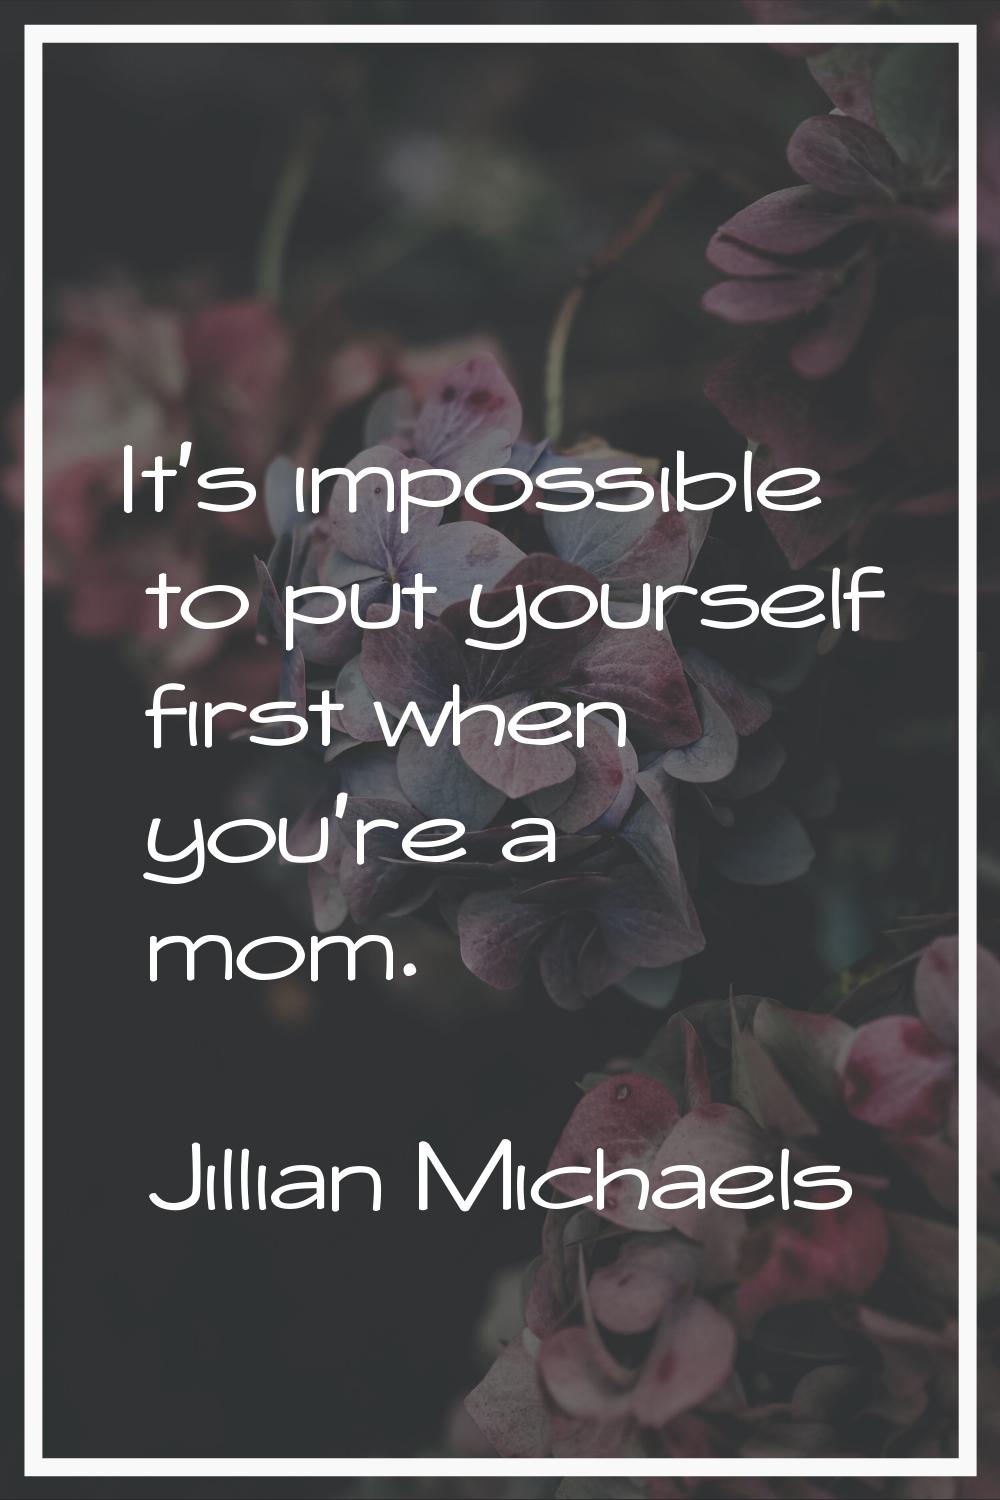 It's impossible to put yourself first when you're a mom.